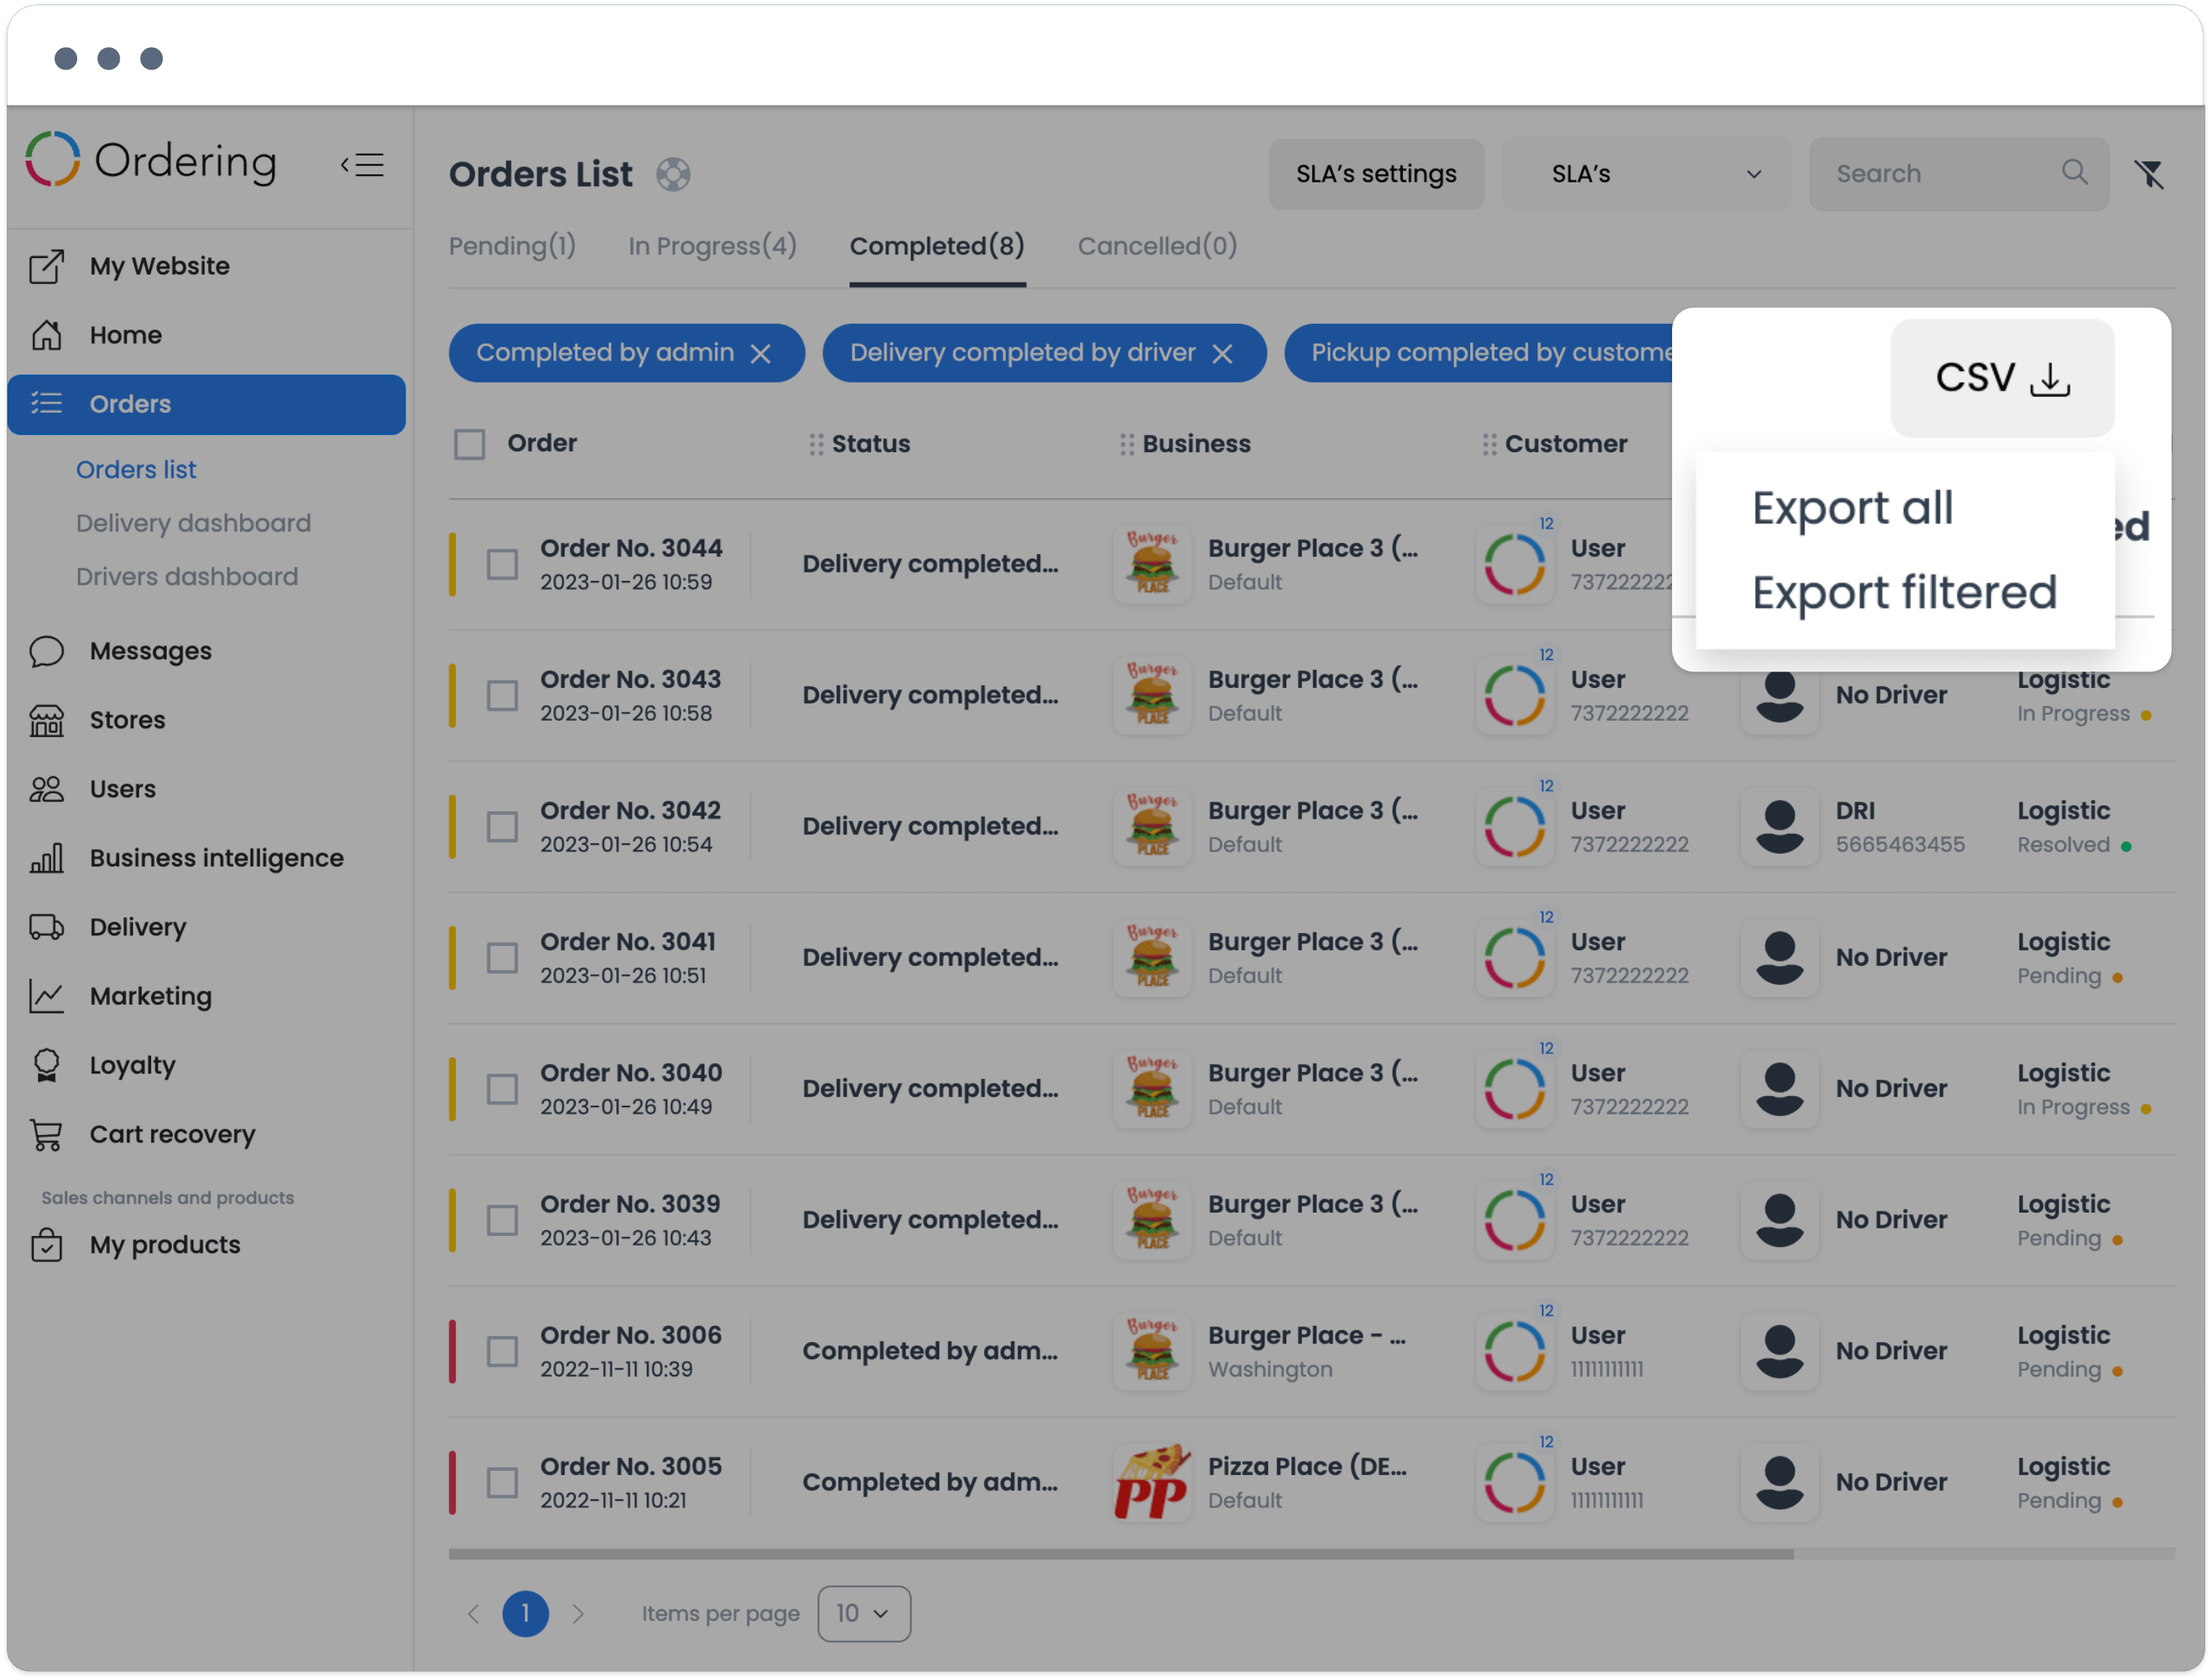 Ordering.co Feature: Export Orders